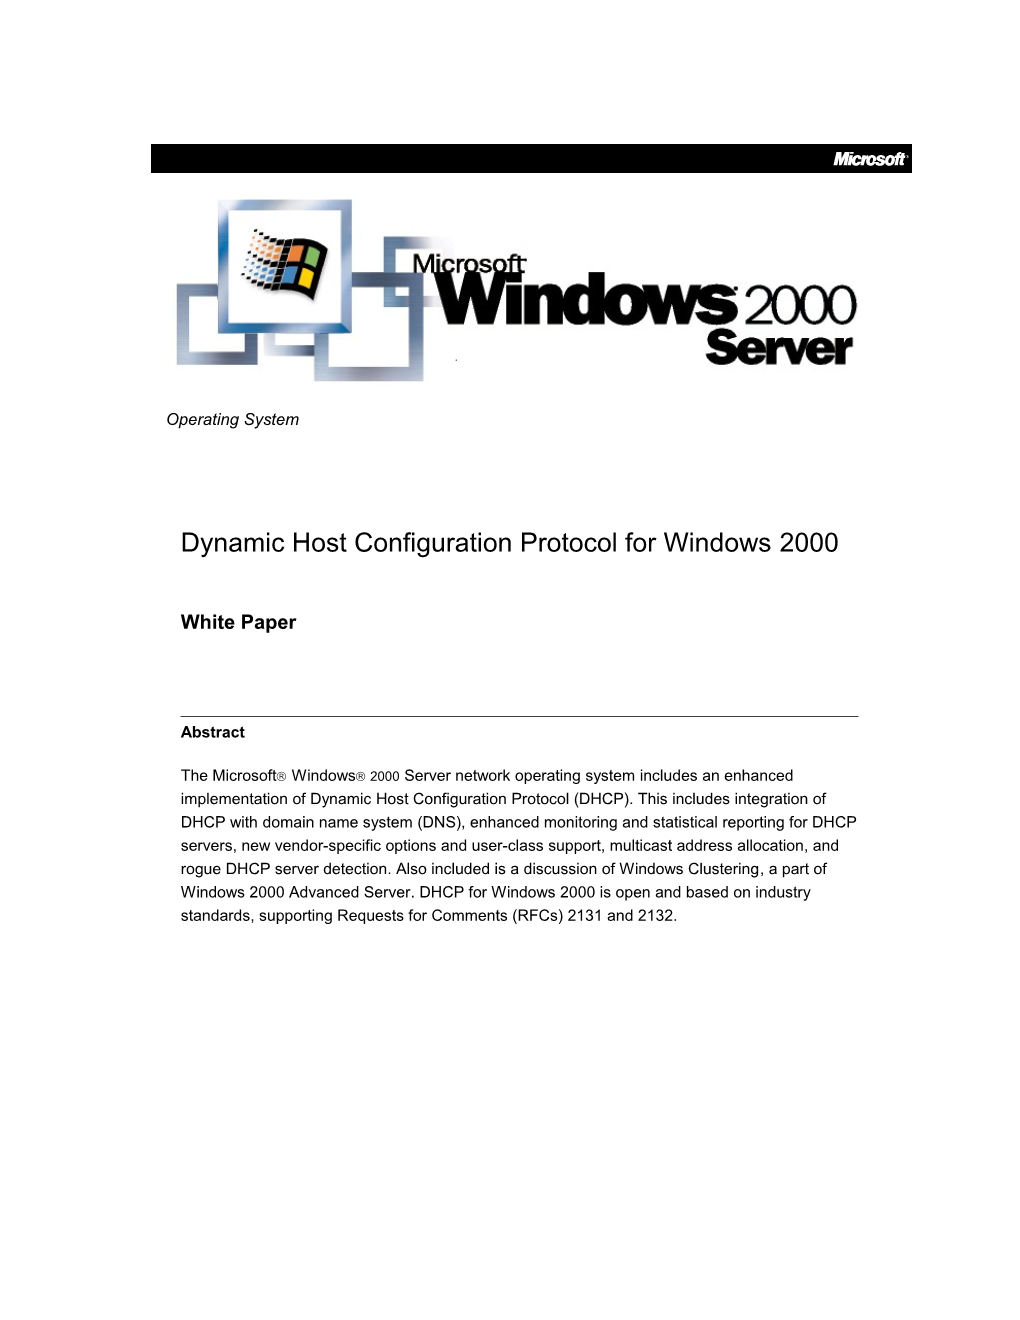 Dynamic Host Configuration Protocol for Window 2000